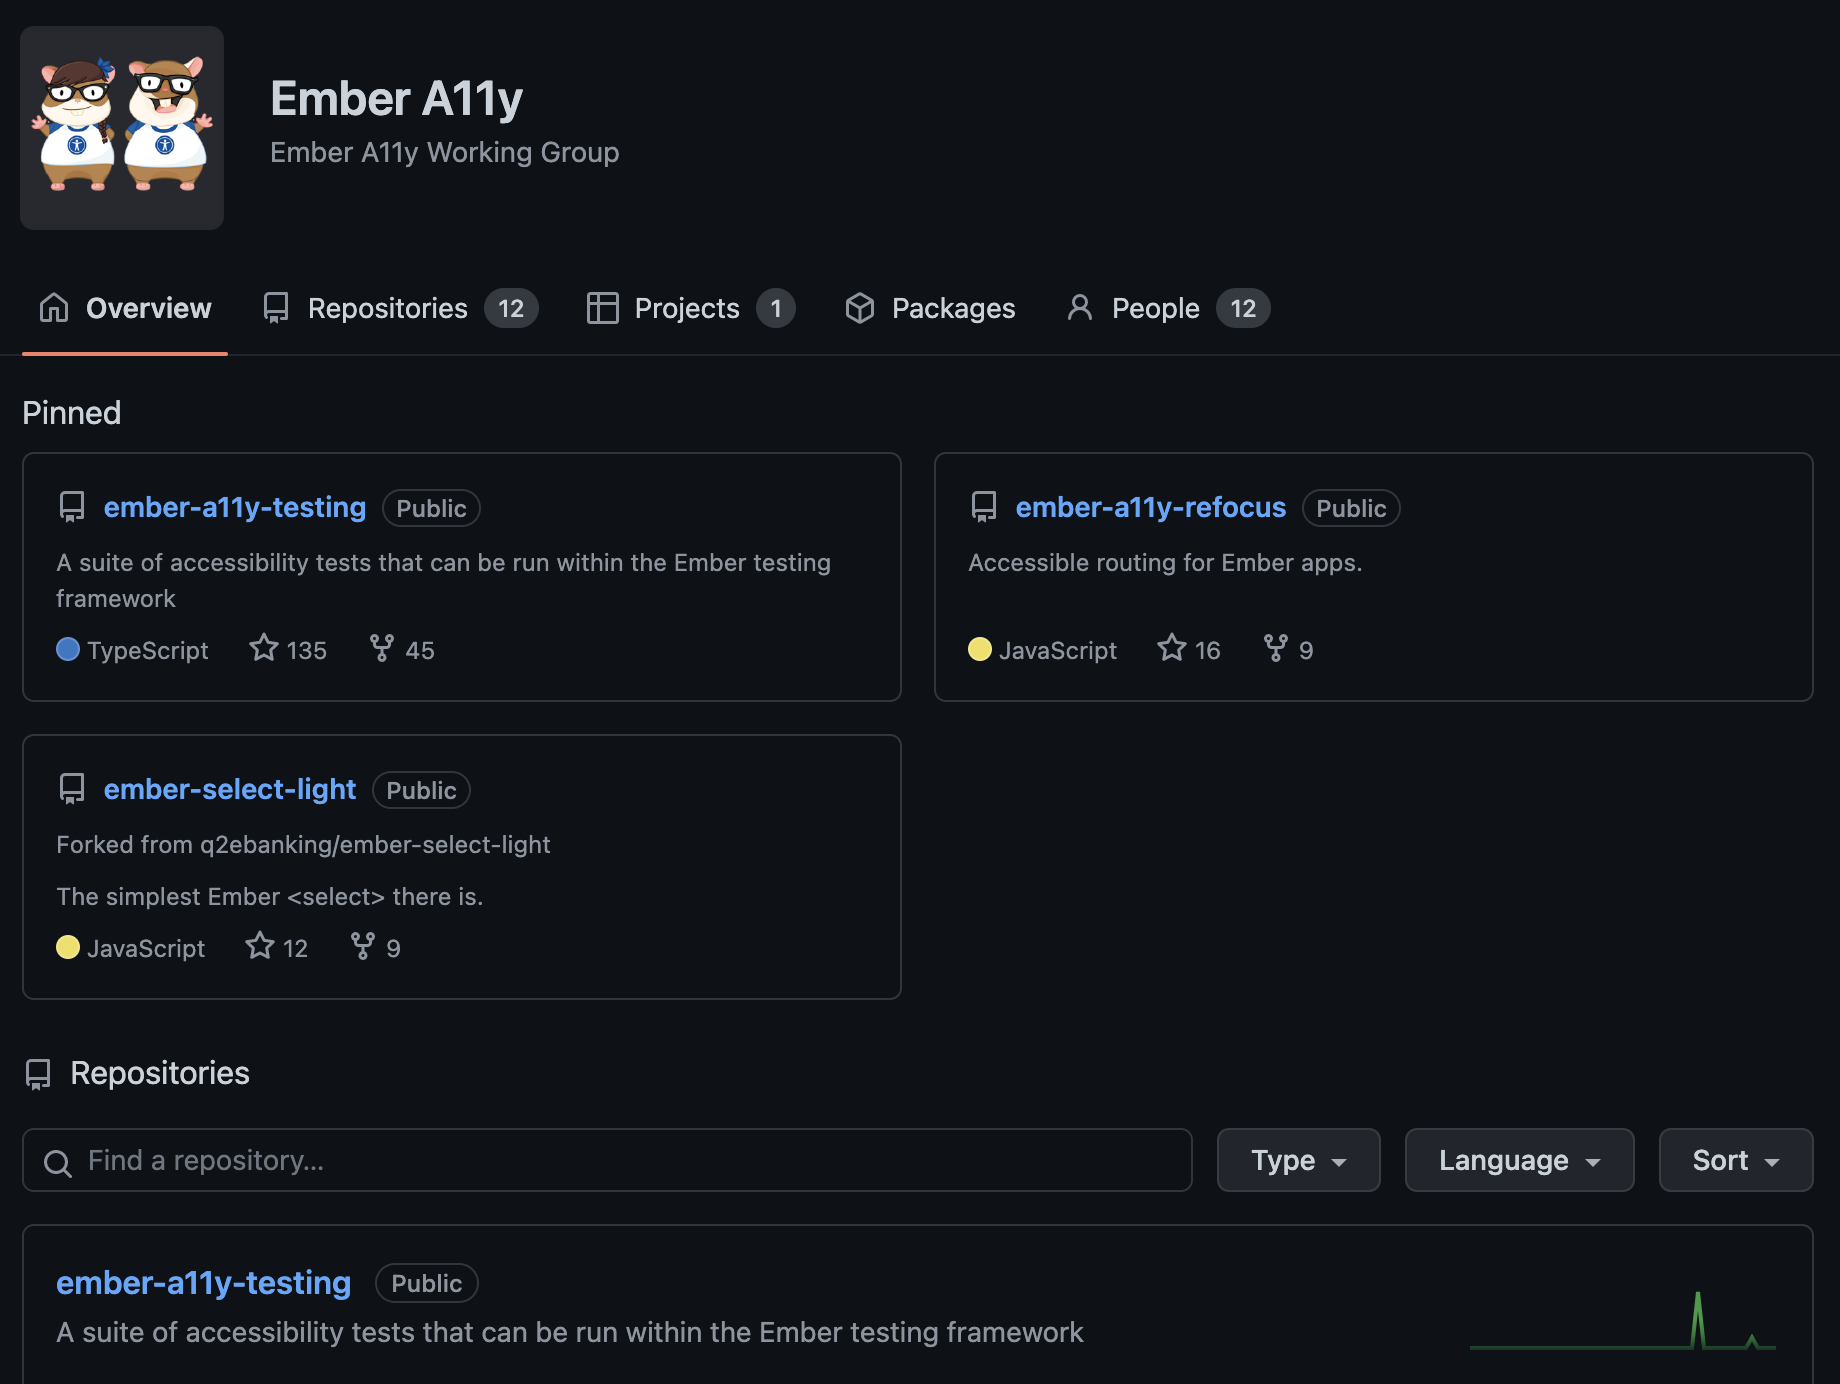 Screenshot of Ember A11y Working Group github page, showing repositories for accessibility projects including 'ember-a11y-testing' and 'ember-a11y-refocus'